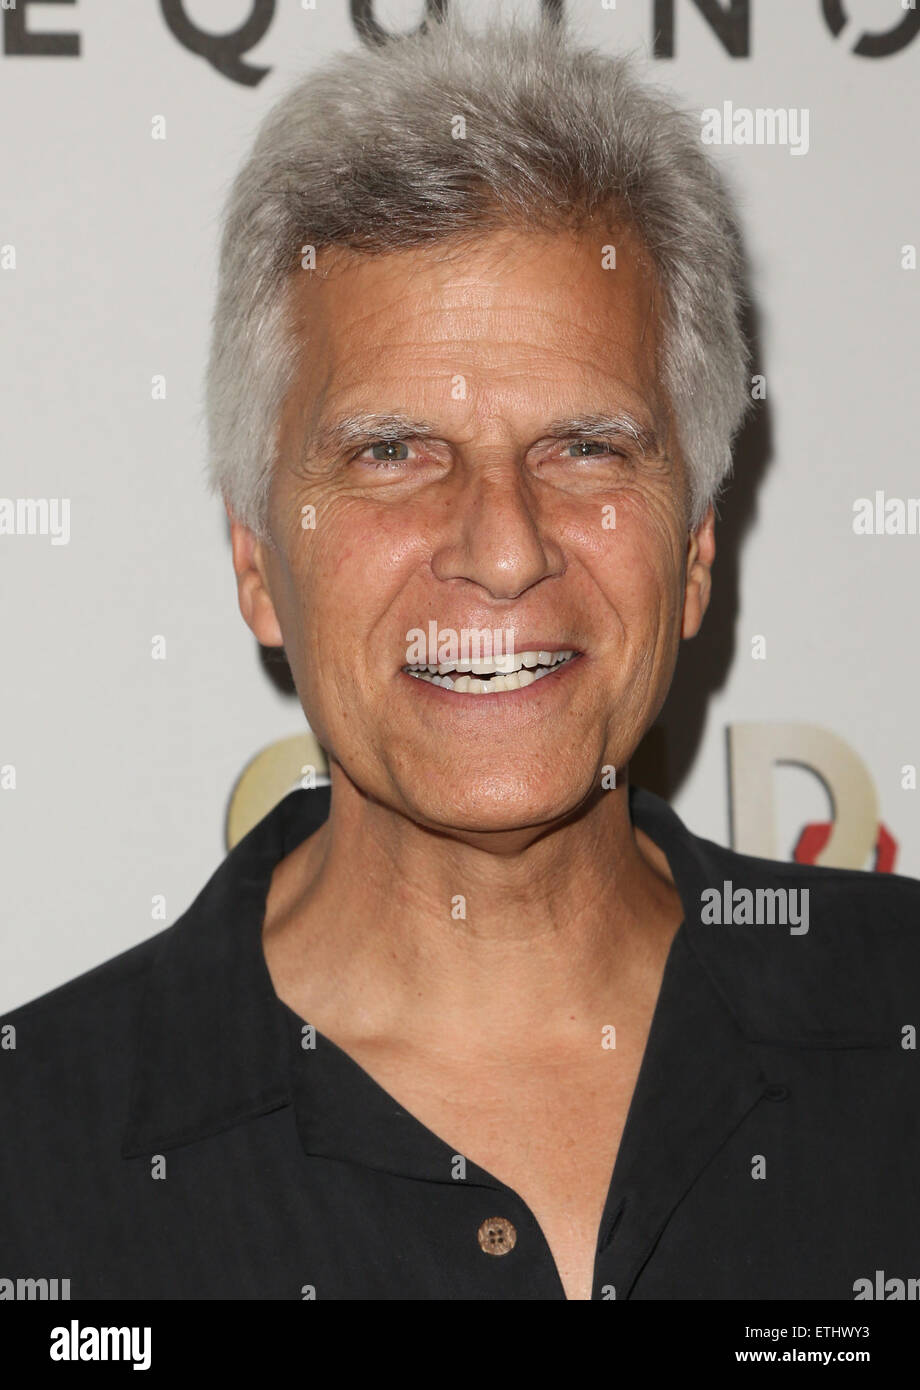 'Gold Meets Golden' benefit hosted by Nicole Kidman and Maria Shriver at Equinox Sports Club - Arrivals  Featuring: Mark Spitz Where: Los Angeles, California, United States When: 21 Feb 2015 Credit: Brian To/WENN.com Stock Photo